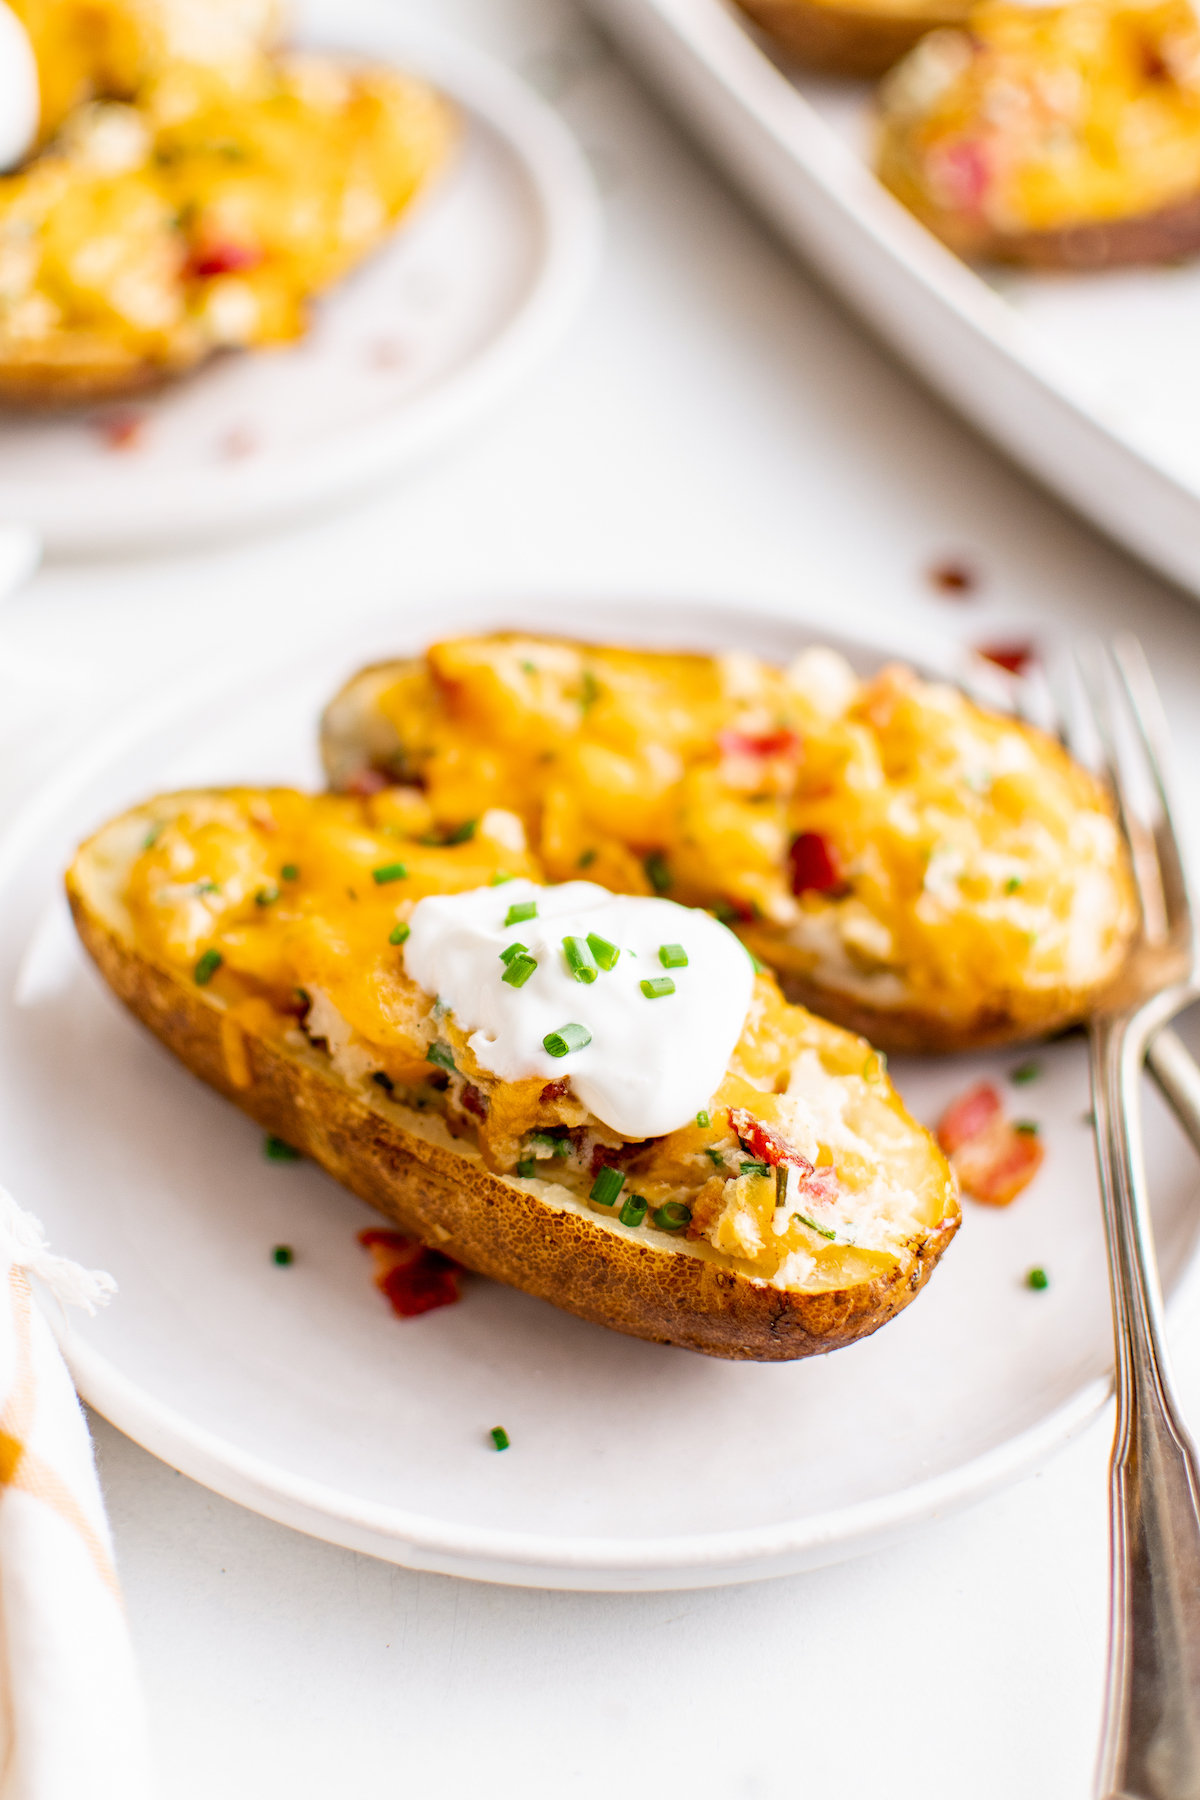 Twice baked potatoes on a white plate.